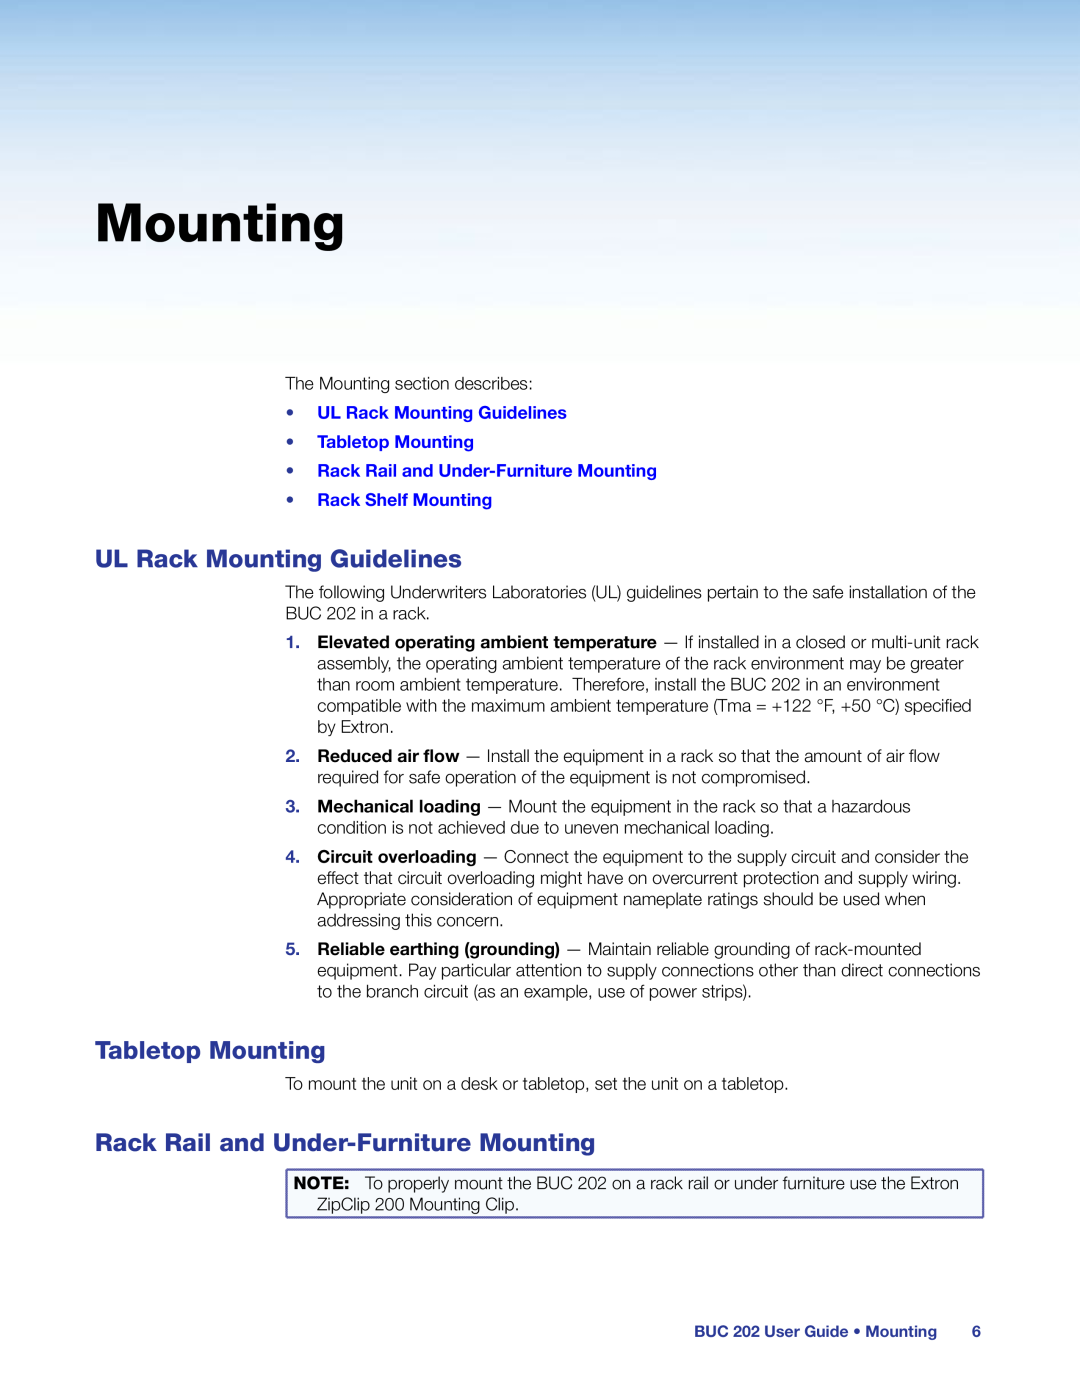 Extron electronic BUC 202 manual UL Rack Mounting Guidelines, Tabletop Mounting, Rack Rail and Under-FurnitureMounting 